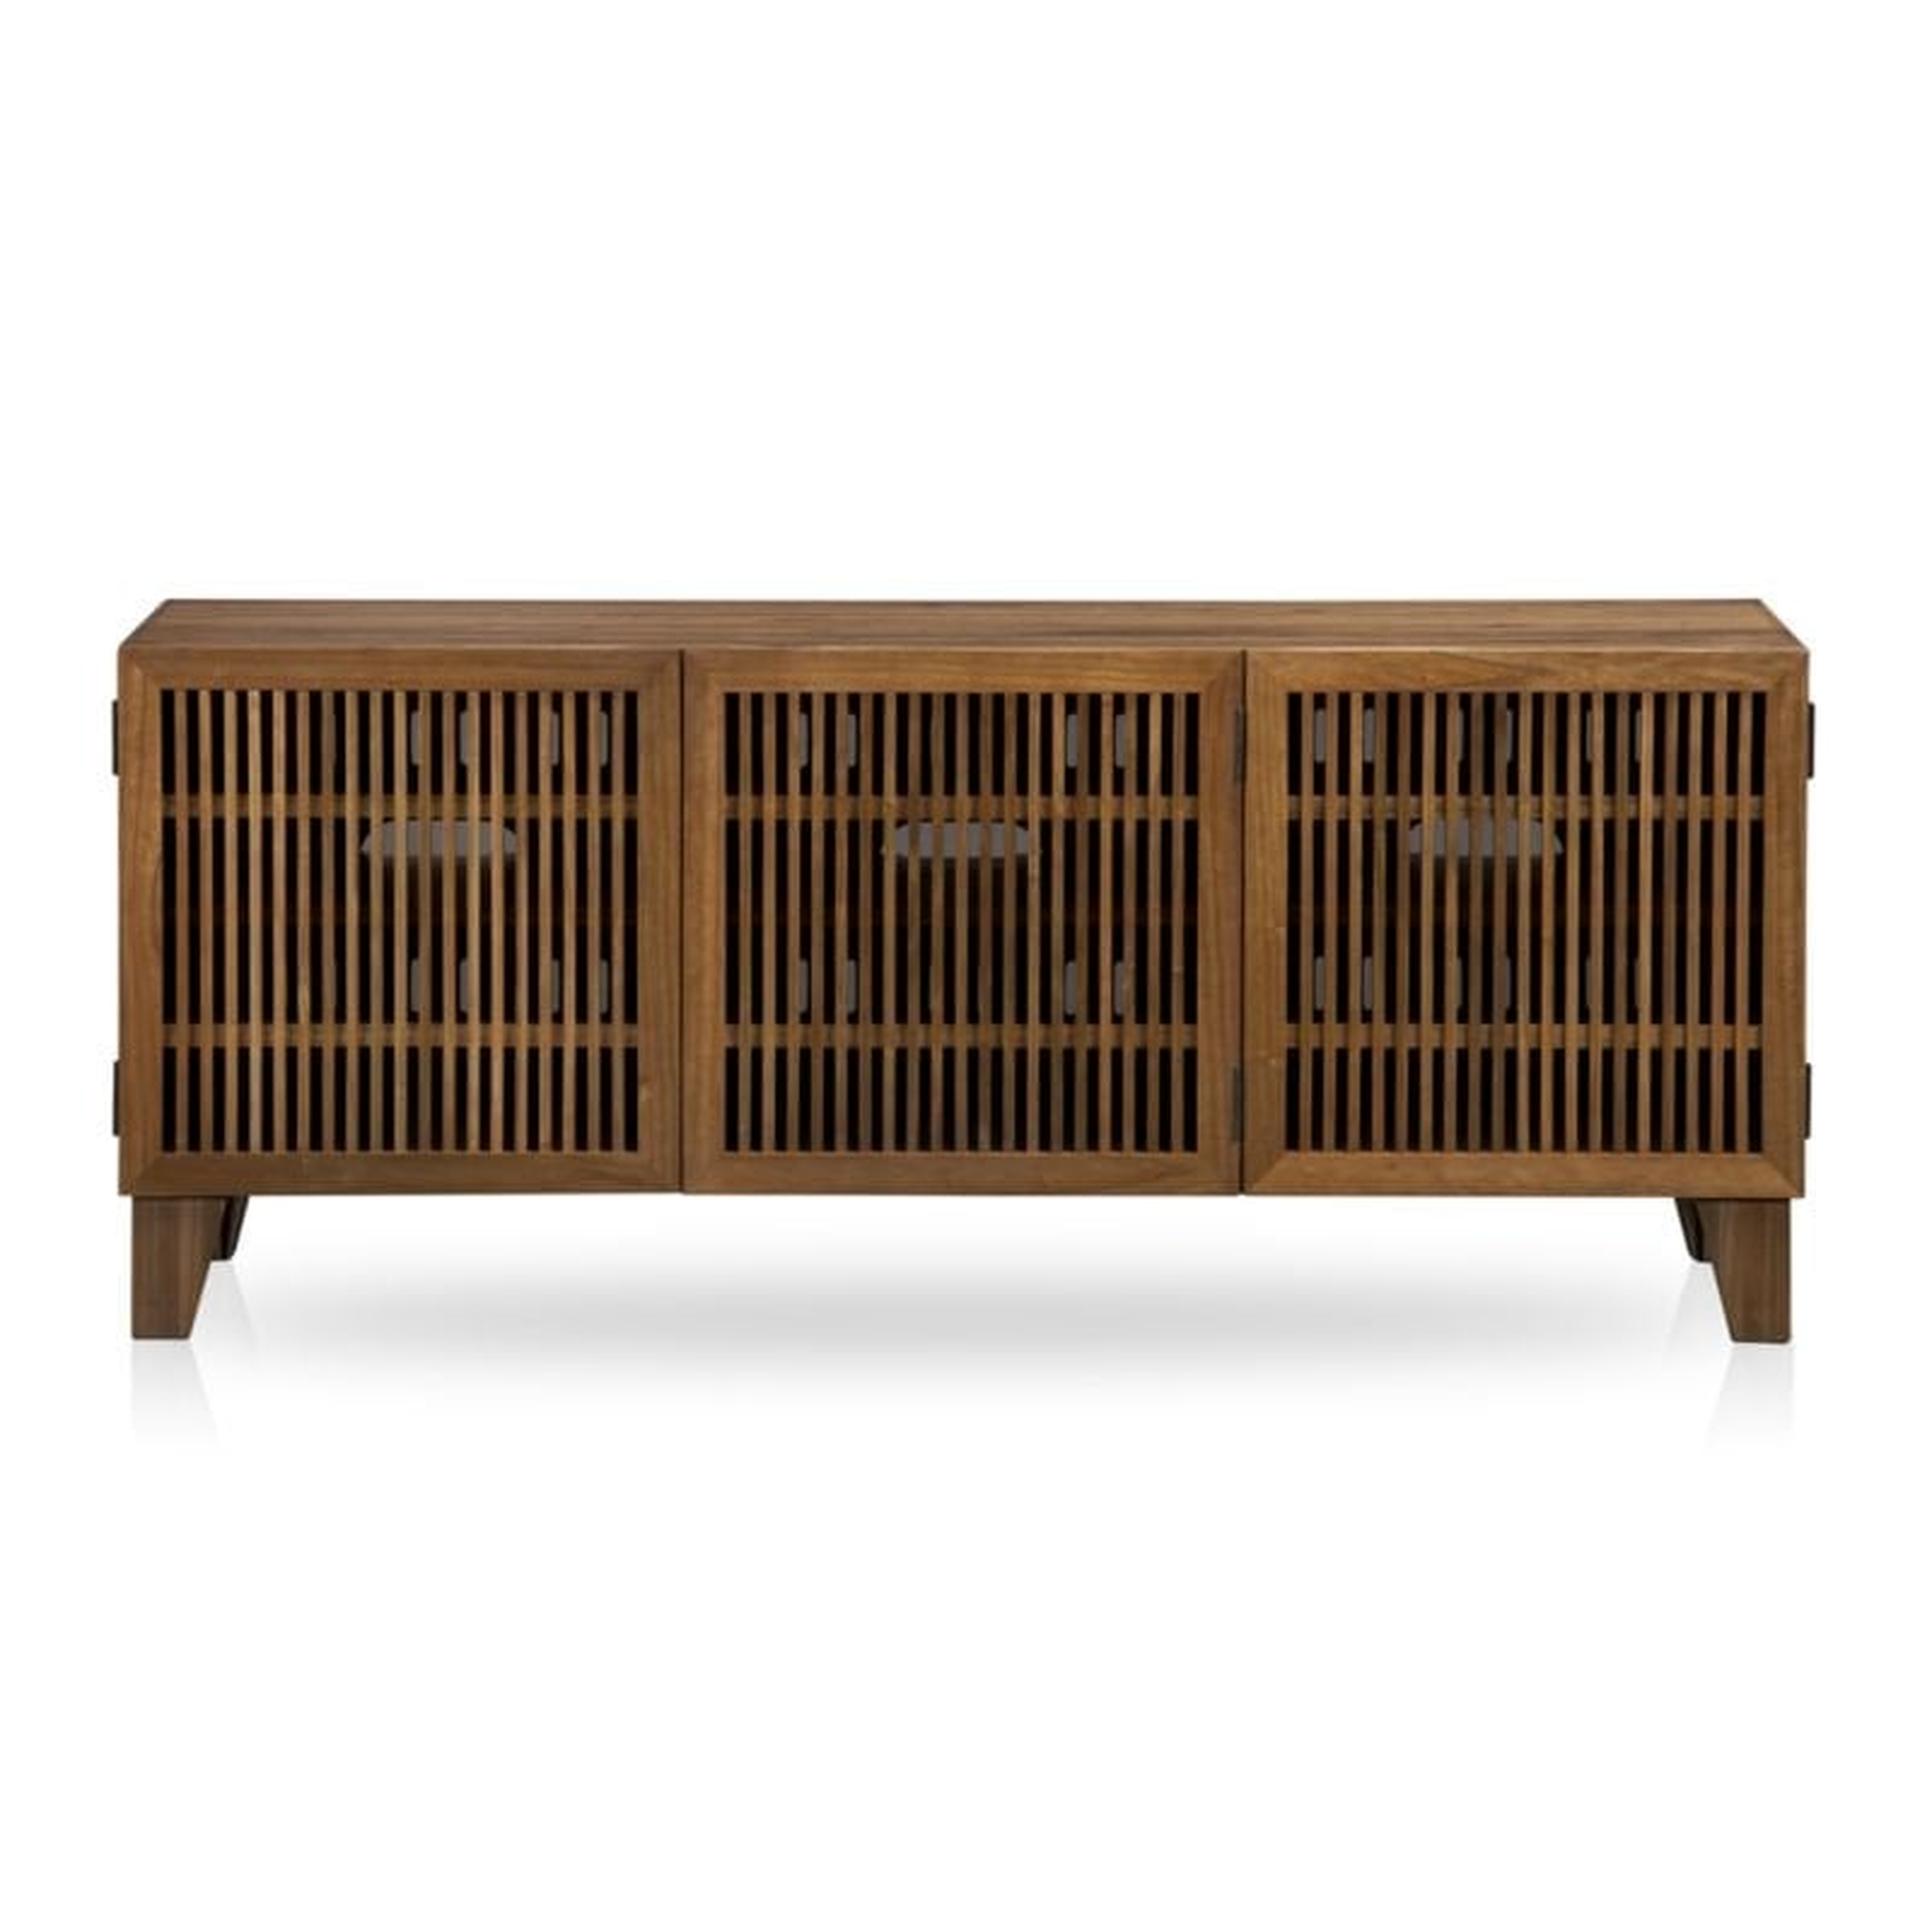 Marin Natural 58" Storage Media Console - Crate and Barrel